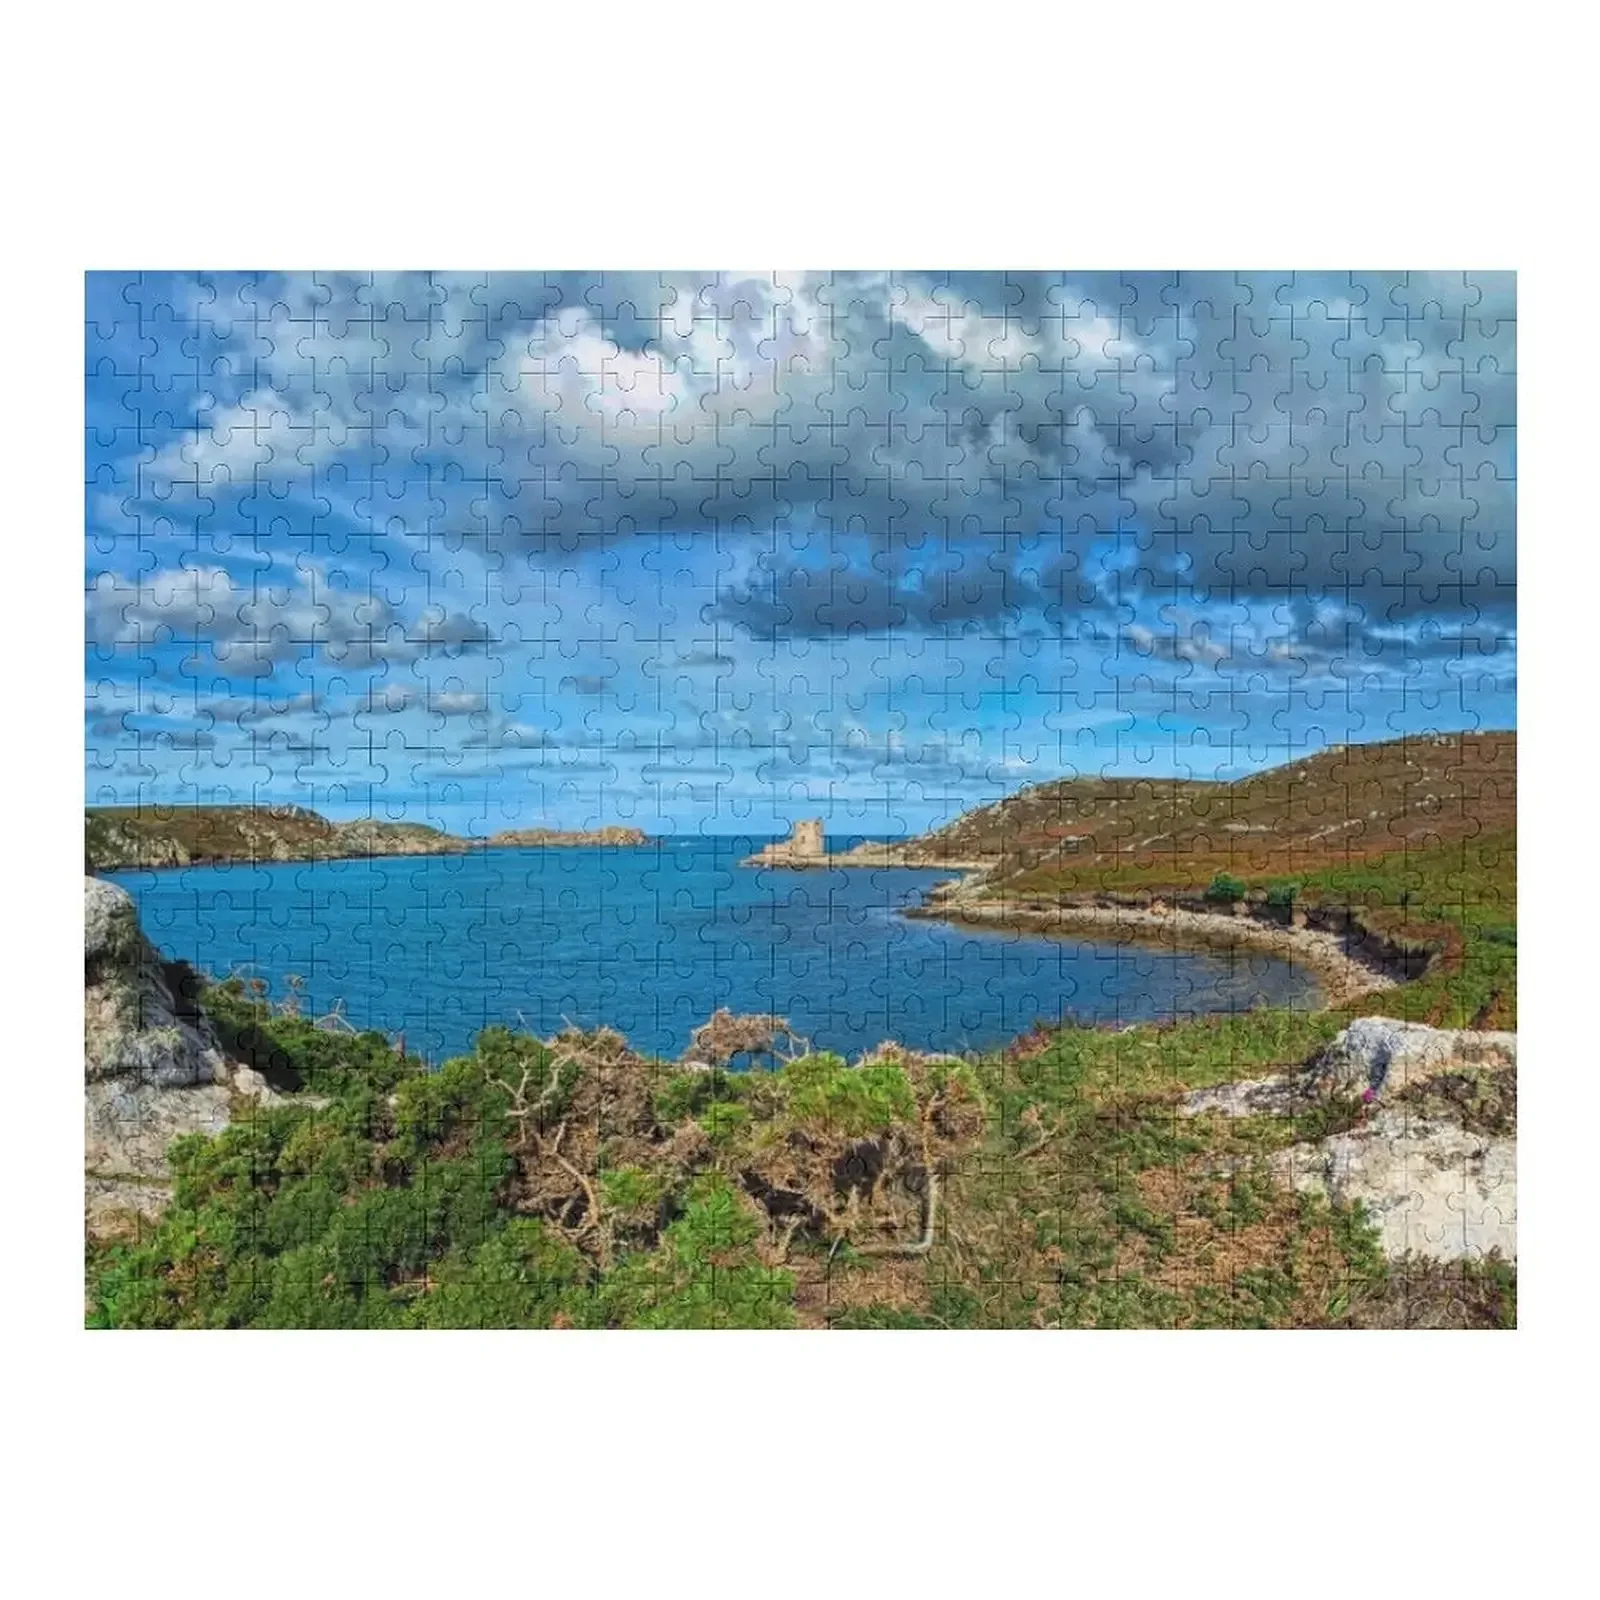 Cromwells Castle Jigsaw Puzzle With Photo Custom Gifts Woodens For Adults Puzzle vintage illustration of arran scotland lochranza castle jigsaw puzzle woodens for adults with photo puzzle